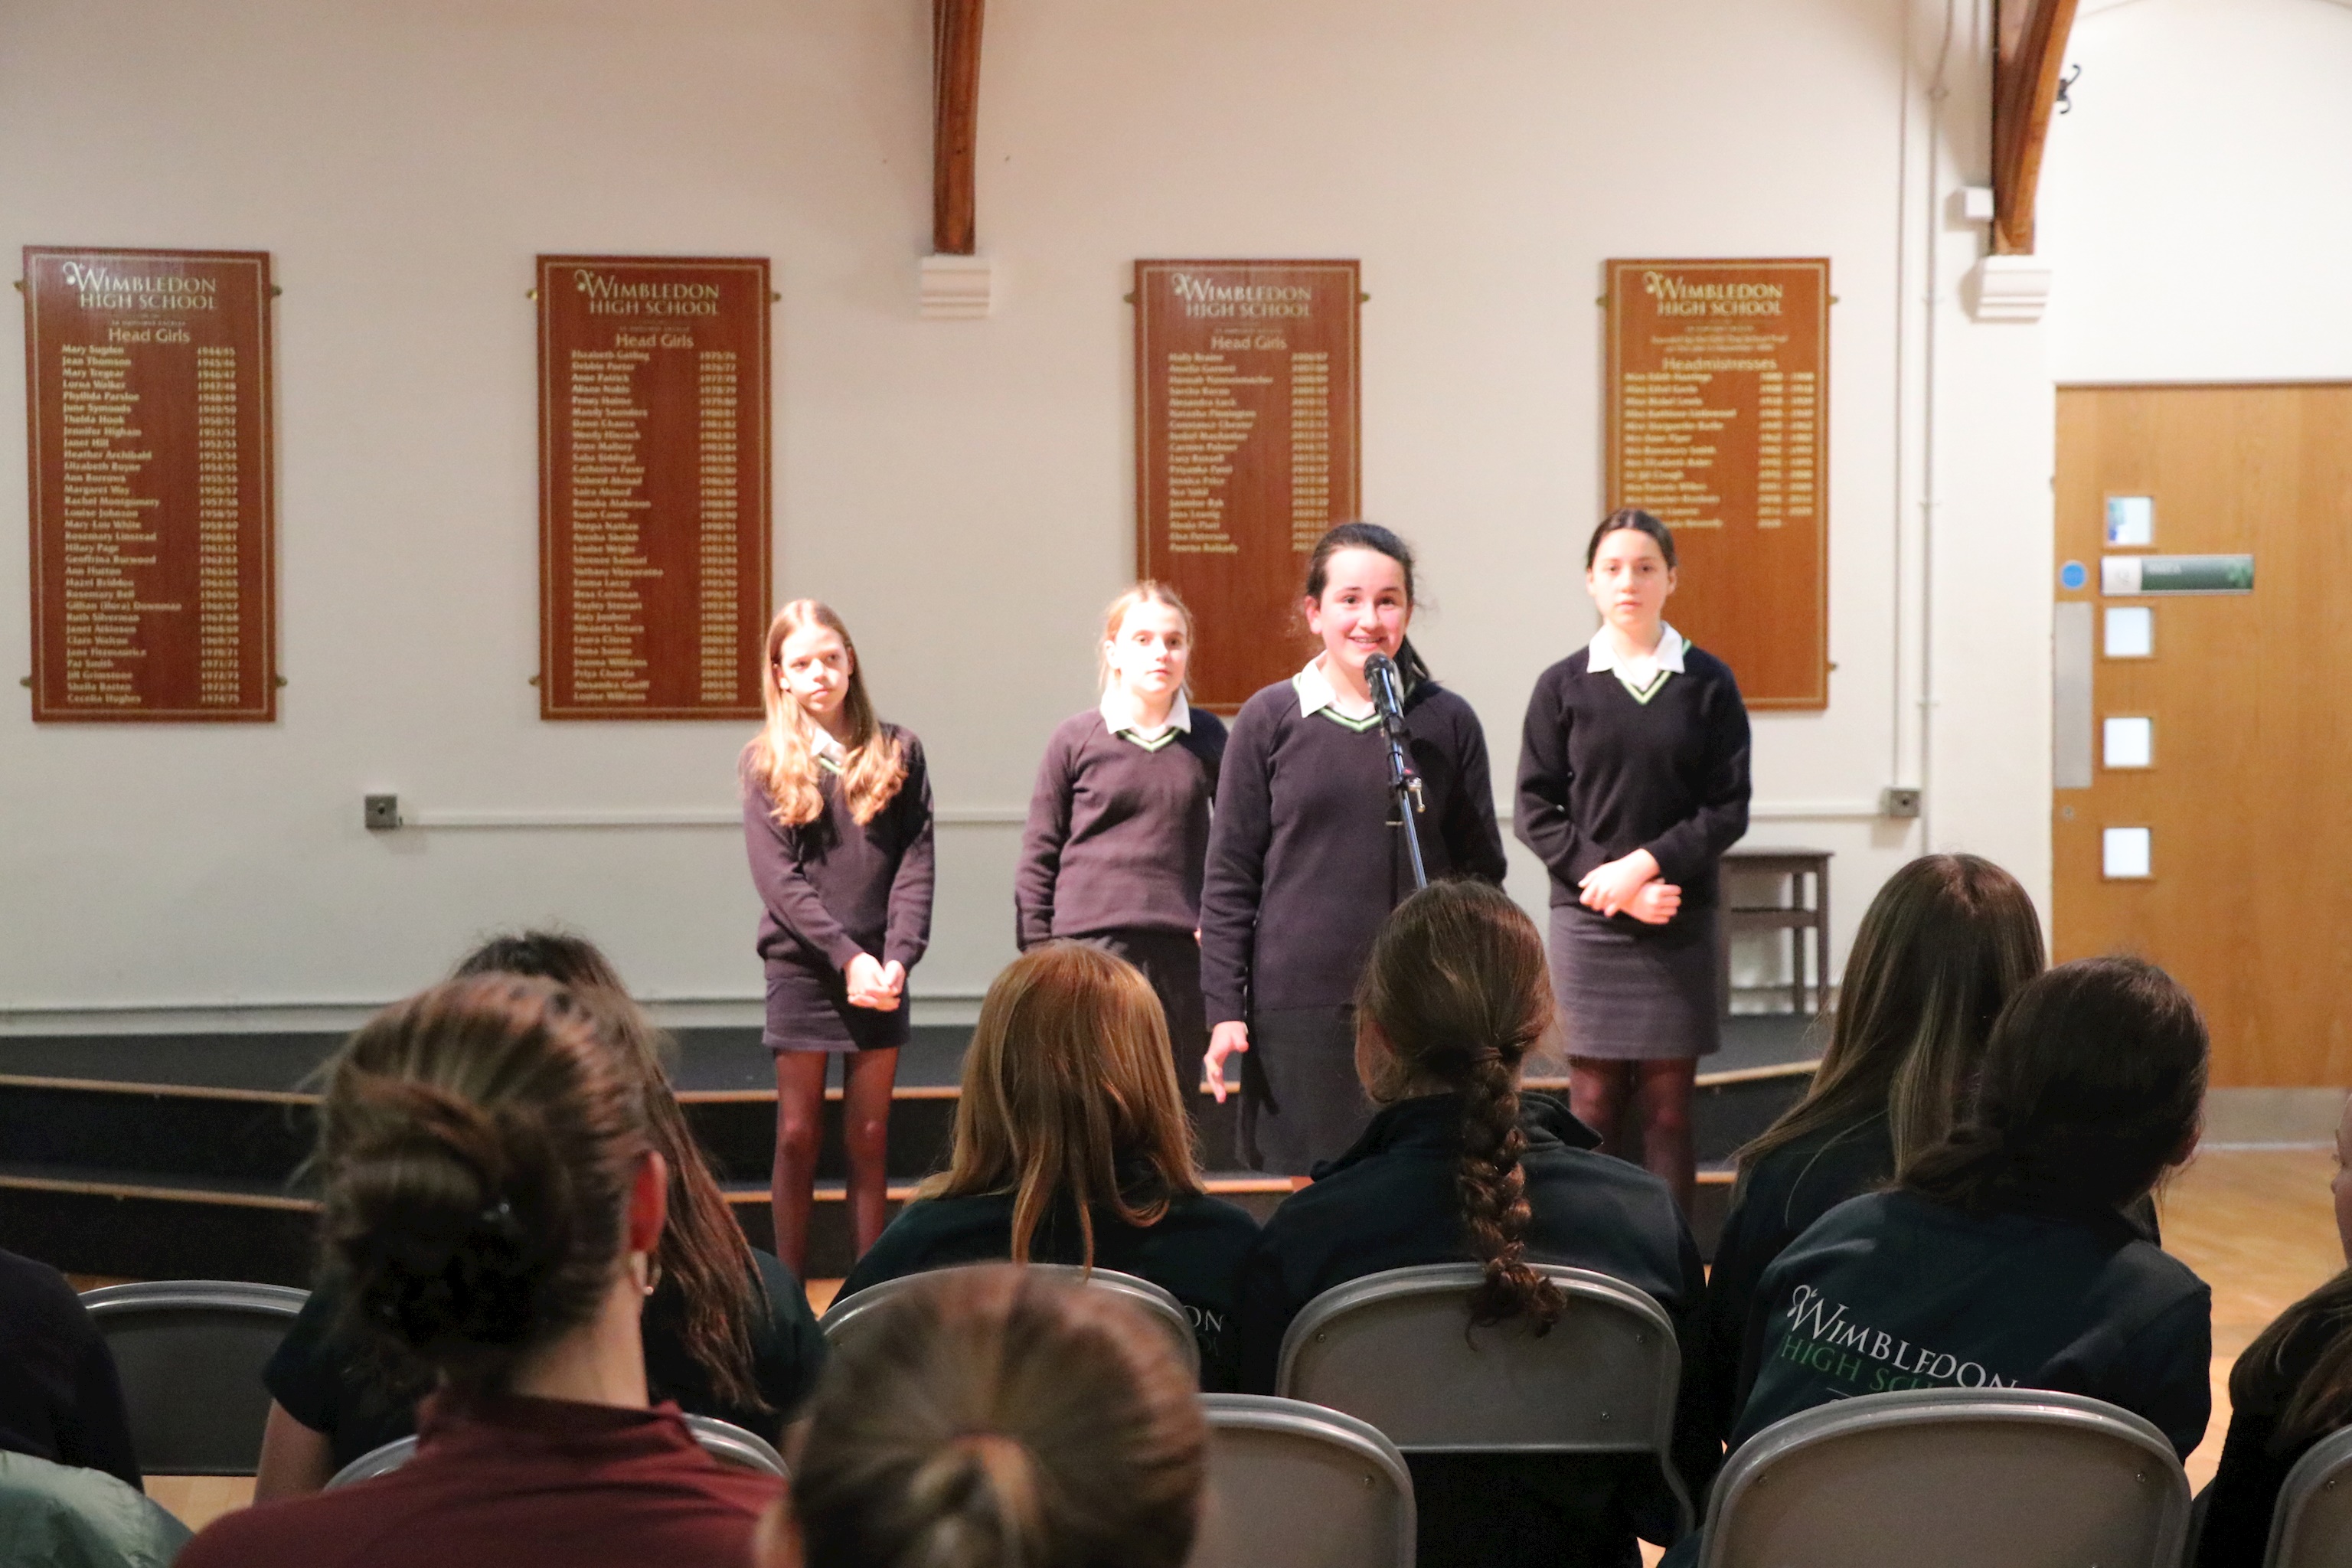 Students in the senior school taking part in Poetry by Heart. They are standing in Senior Hall reciting a poem to a room of students and teachers